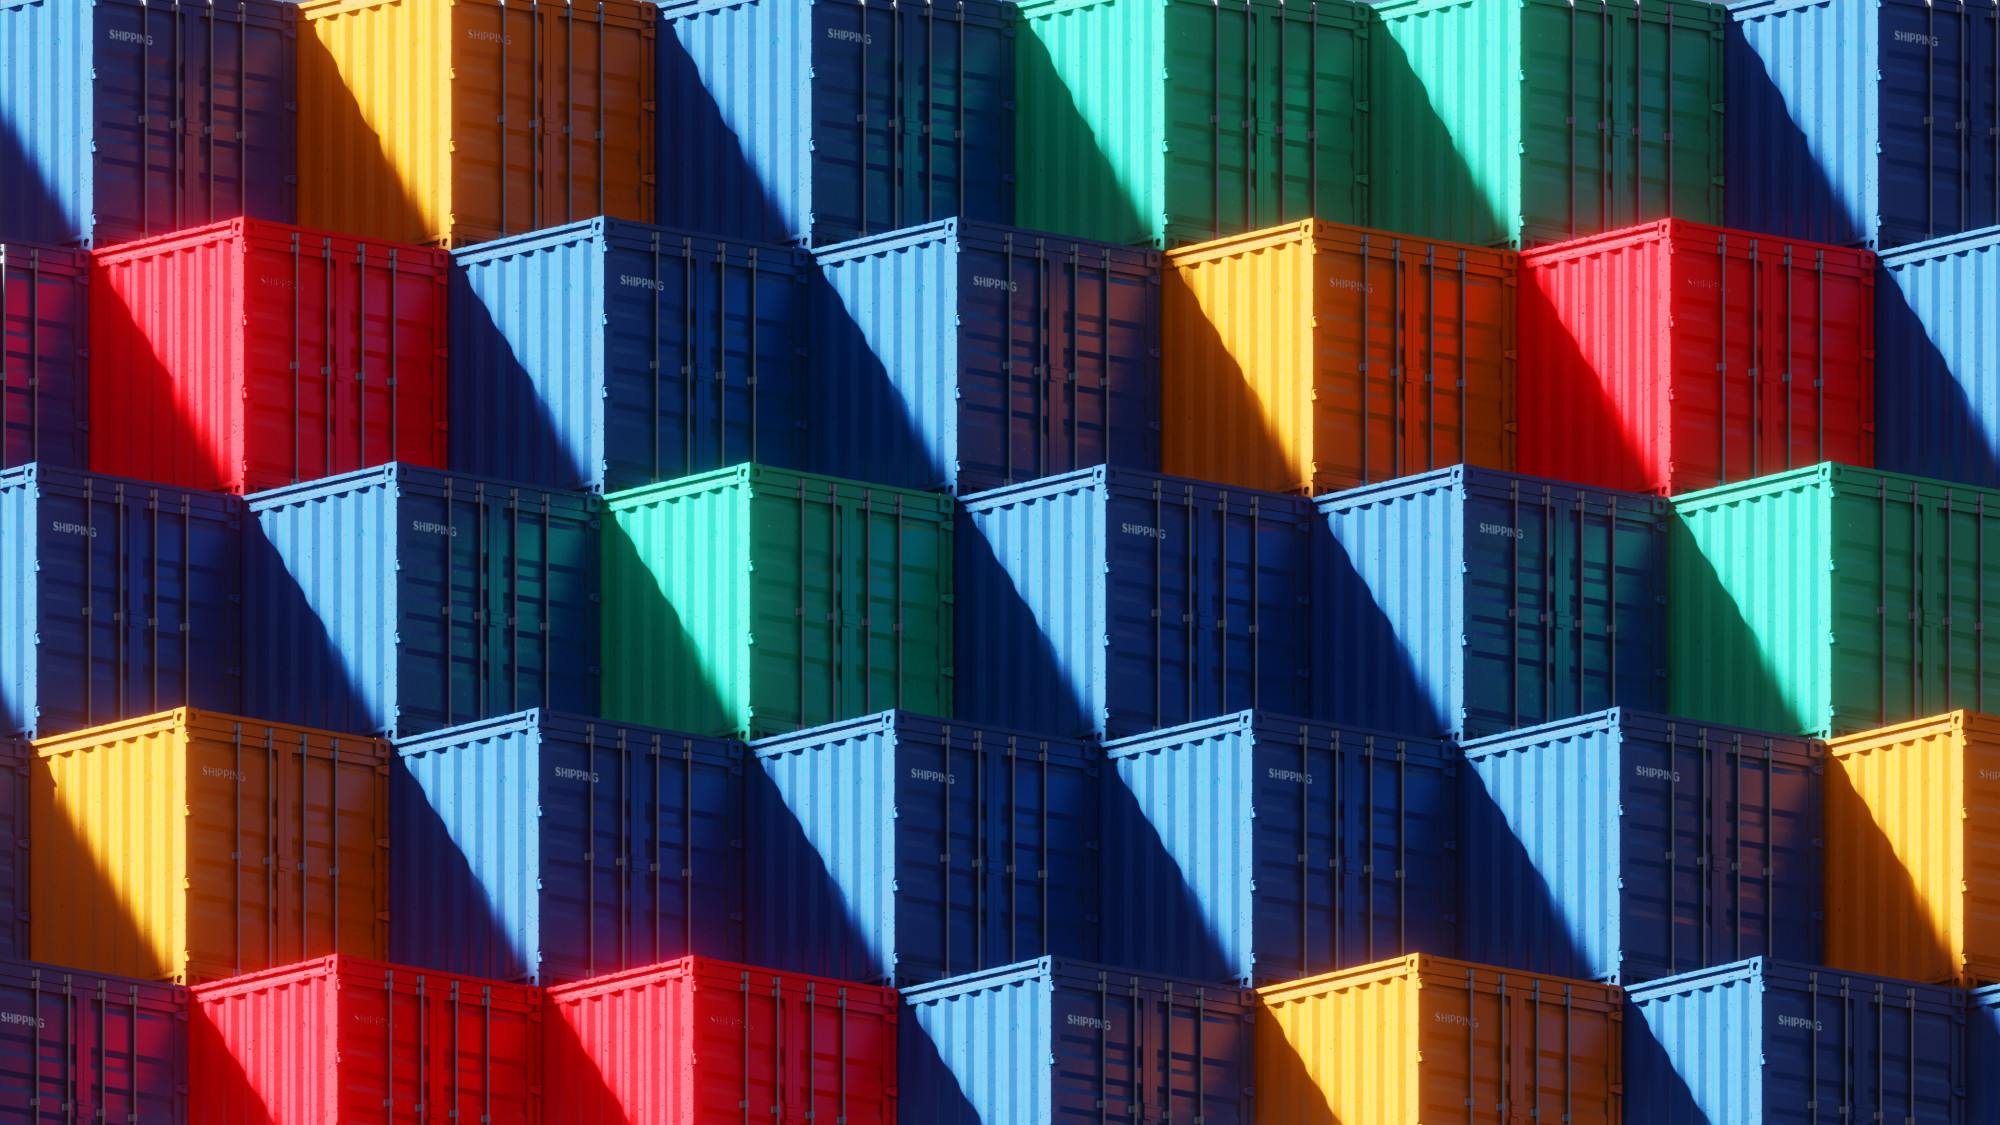 shipping containers in multicolored pattern. 